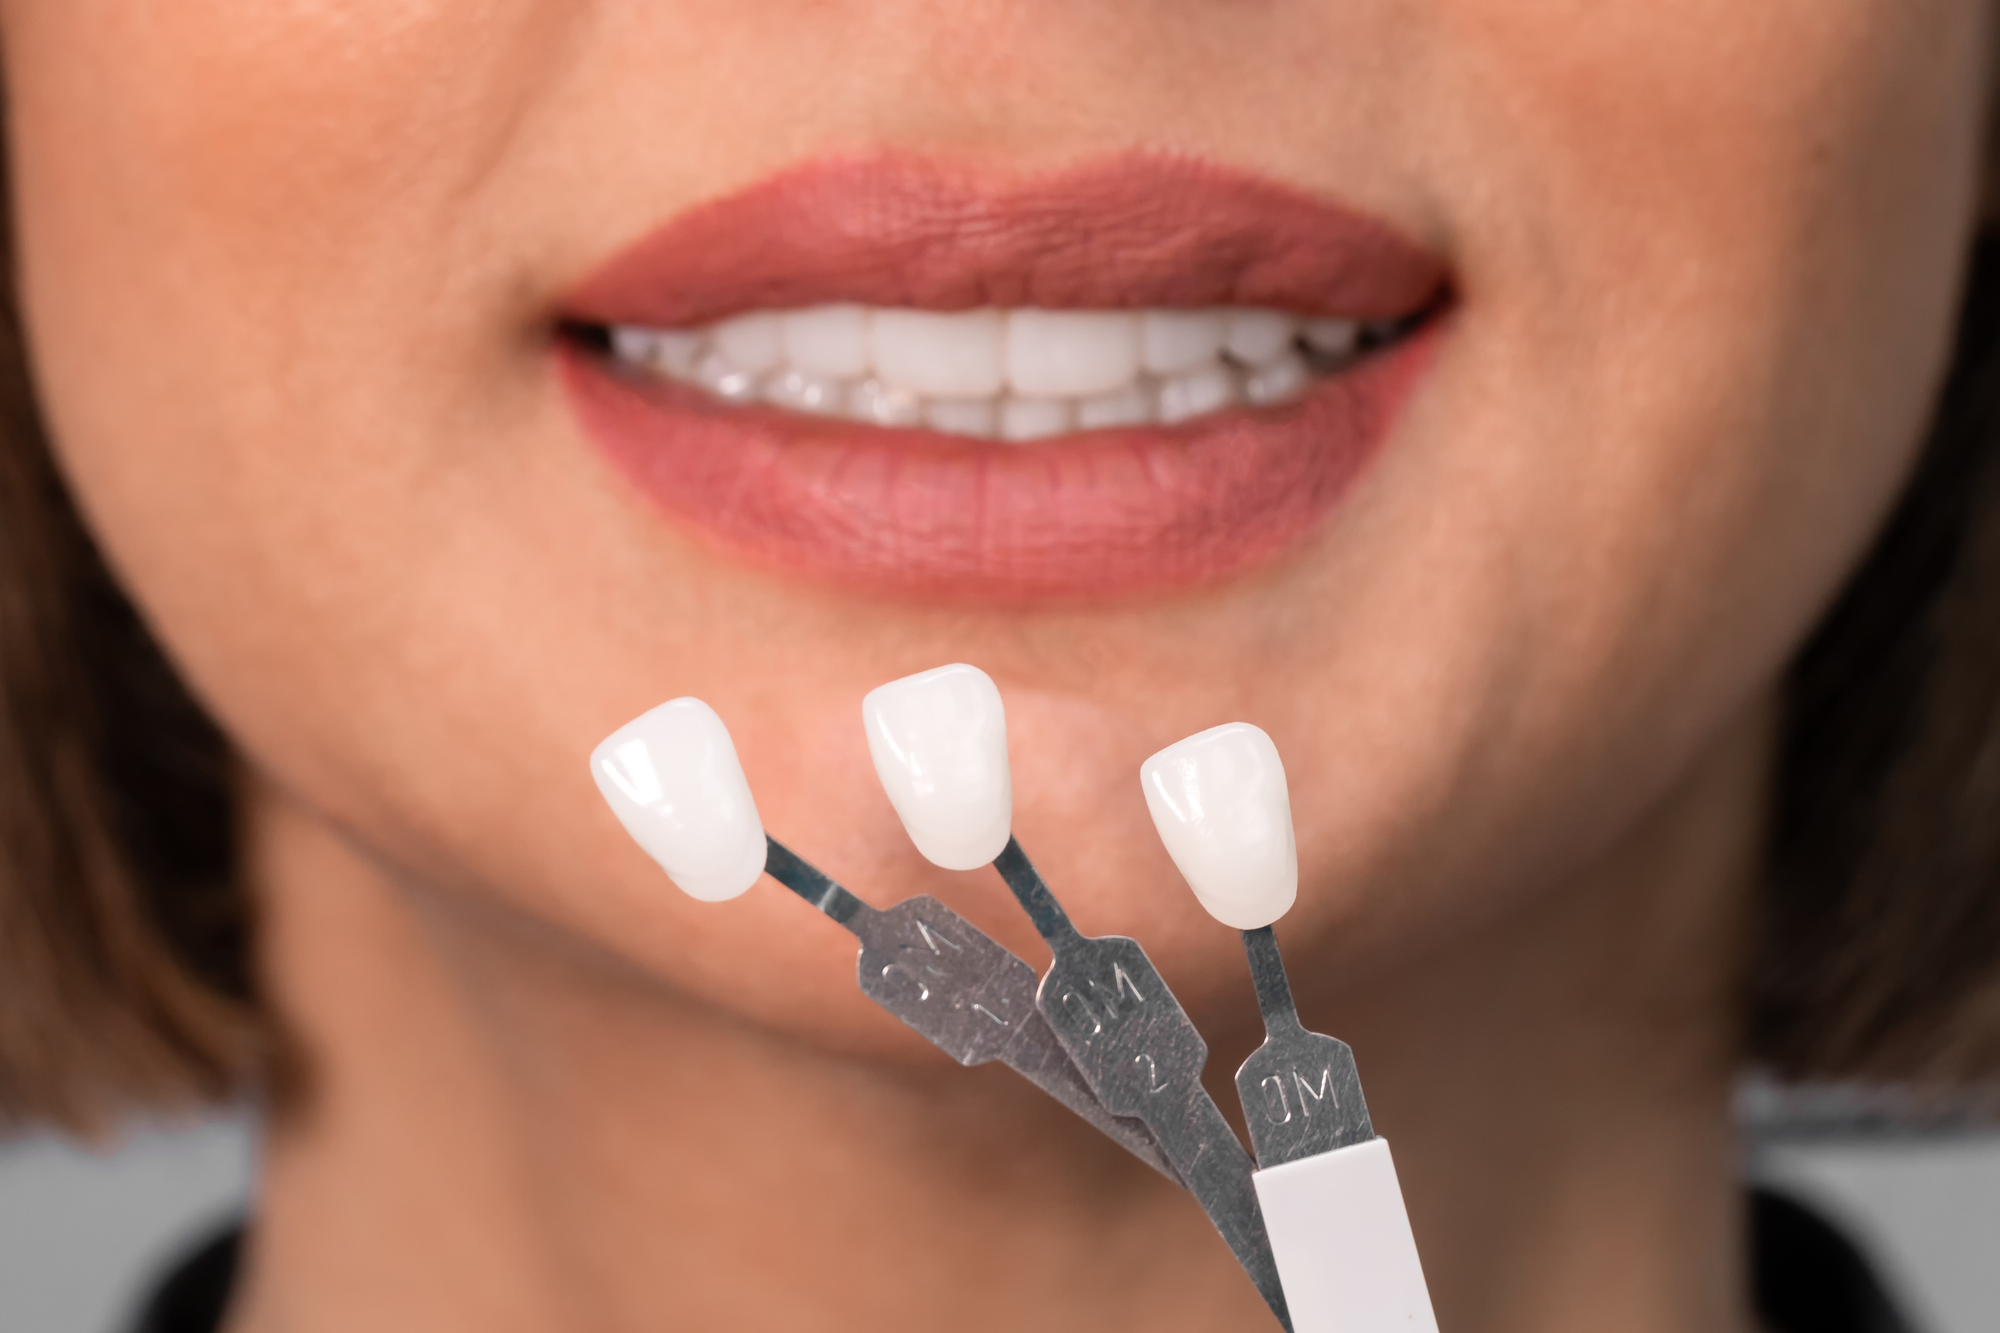 What Are Dental Veneers Made Of: Materials and Composition